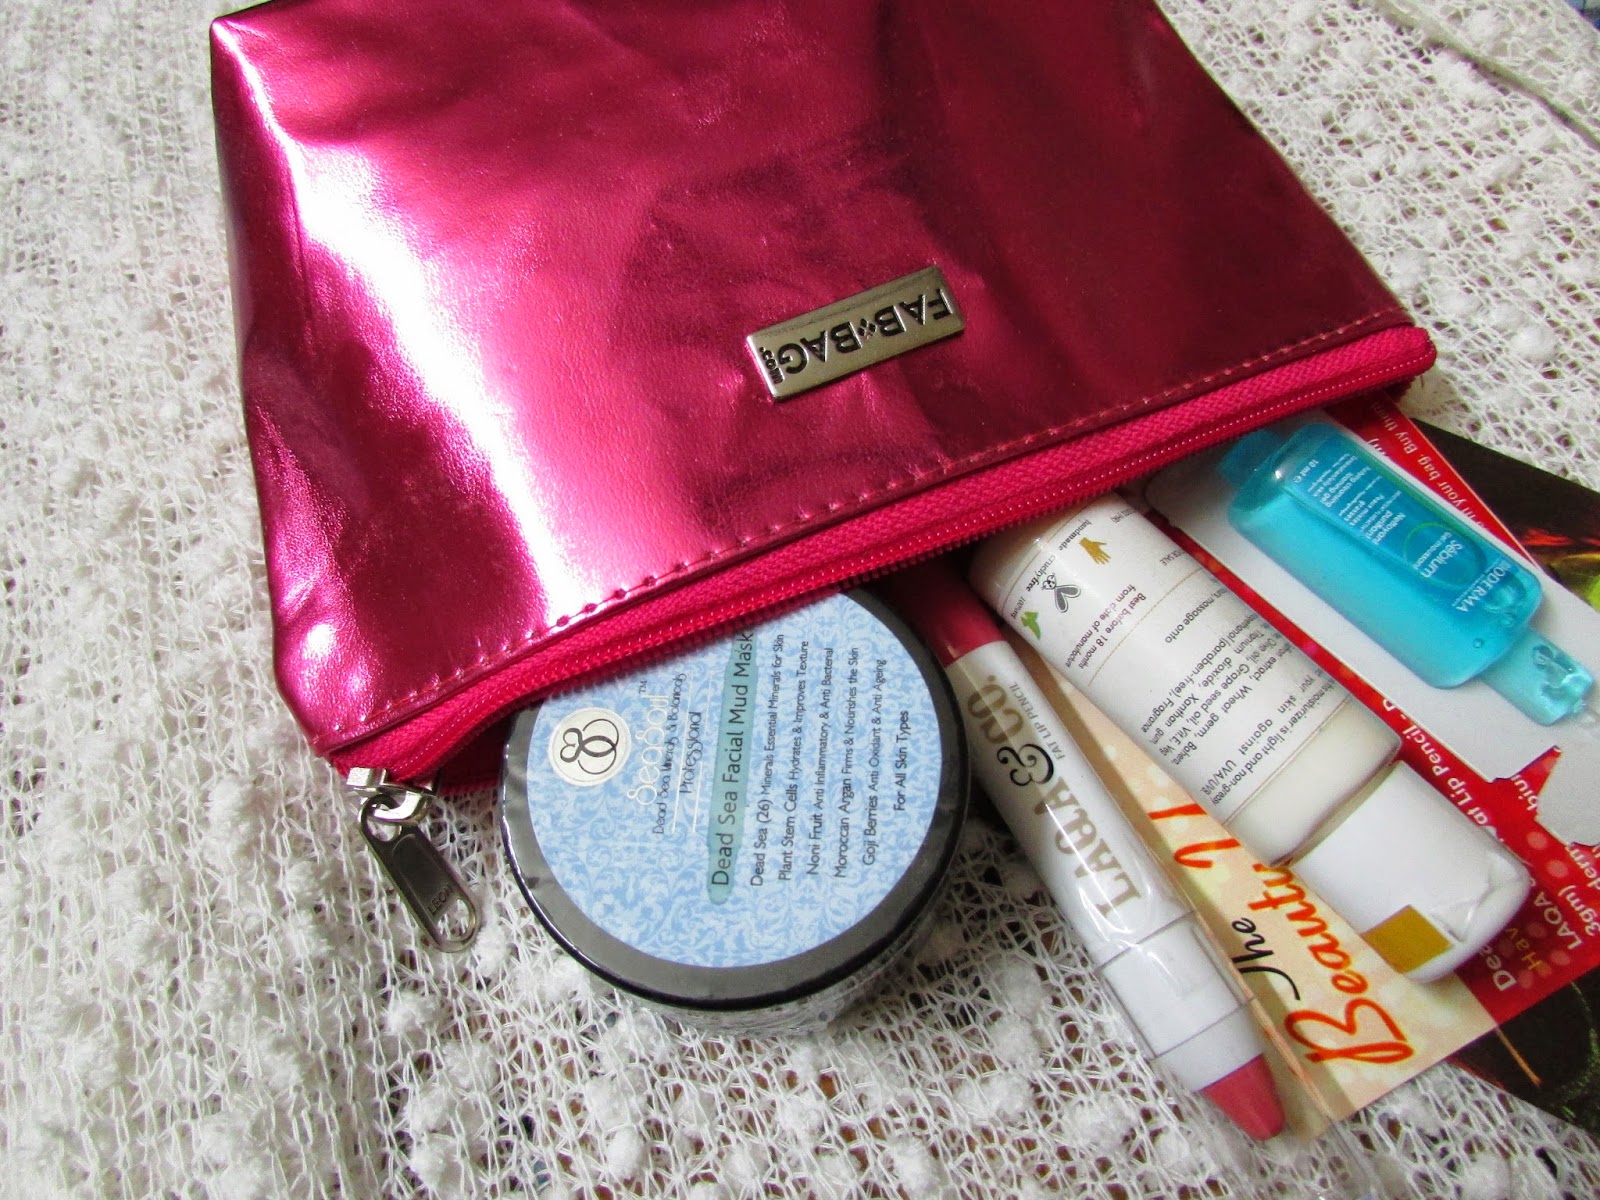 January Fab Bag price, January Fab Bag Review, Fab Bag, Fab Bag india, Fab Bag subscription, Seasoul Dead Skin Facial Mud Mask, Bioderma Sebium Gel Moussant Face Wash, Splurge Daily Moisturizer with Sun Protection, LAQA & Co. Fat Lip Pencil,IndieEco, Kronokare, makeup monthly subscription service, ,beauty , fashion,beauty and fashion,beauty blog, fashion blog , indian beauty blog,indian fashion blog, beauty and fashion blog, indian beauty and fashion blog, indian bloggers, indian beauty bloggers, indian fashion bloggers,indian bloggers online, top 10 indian bloggers, top indian bloggers,top 10 fashion bloggers, indian bloggers on blogspot,home remedies, how to